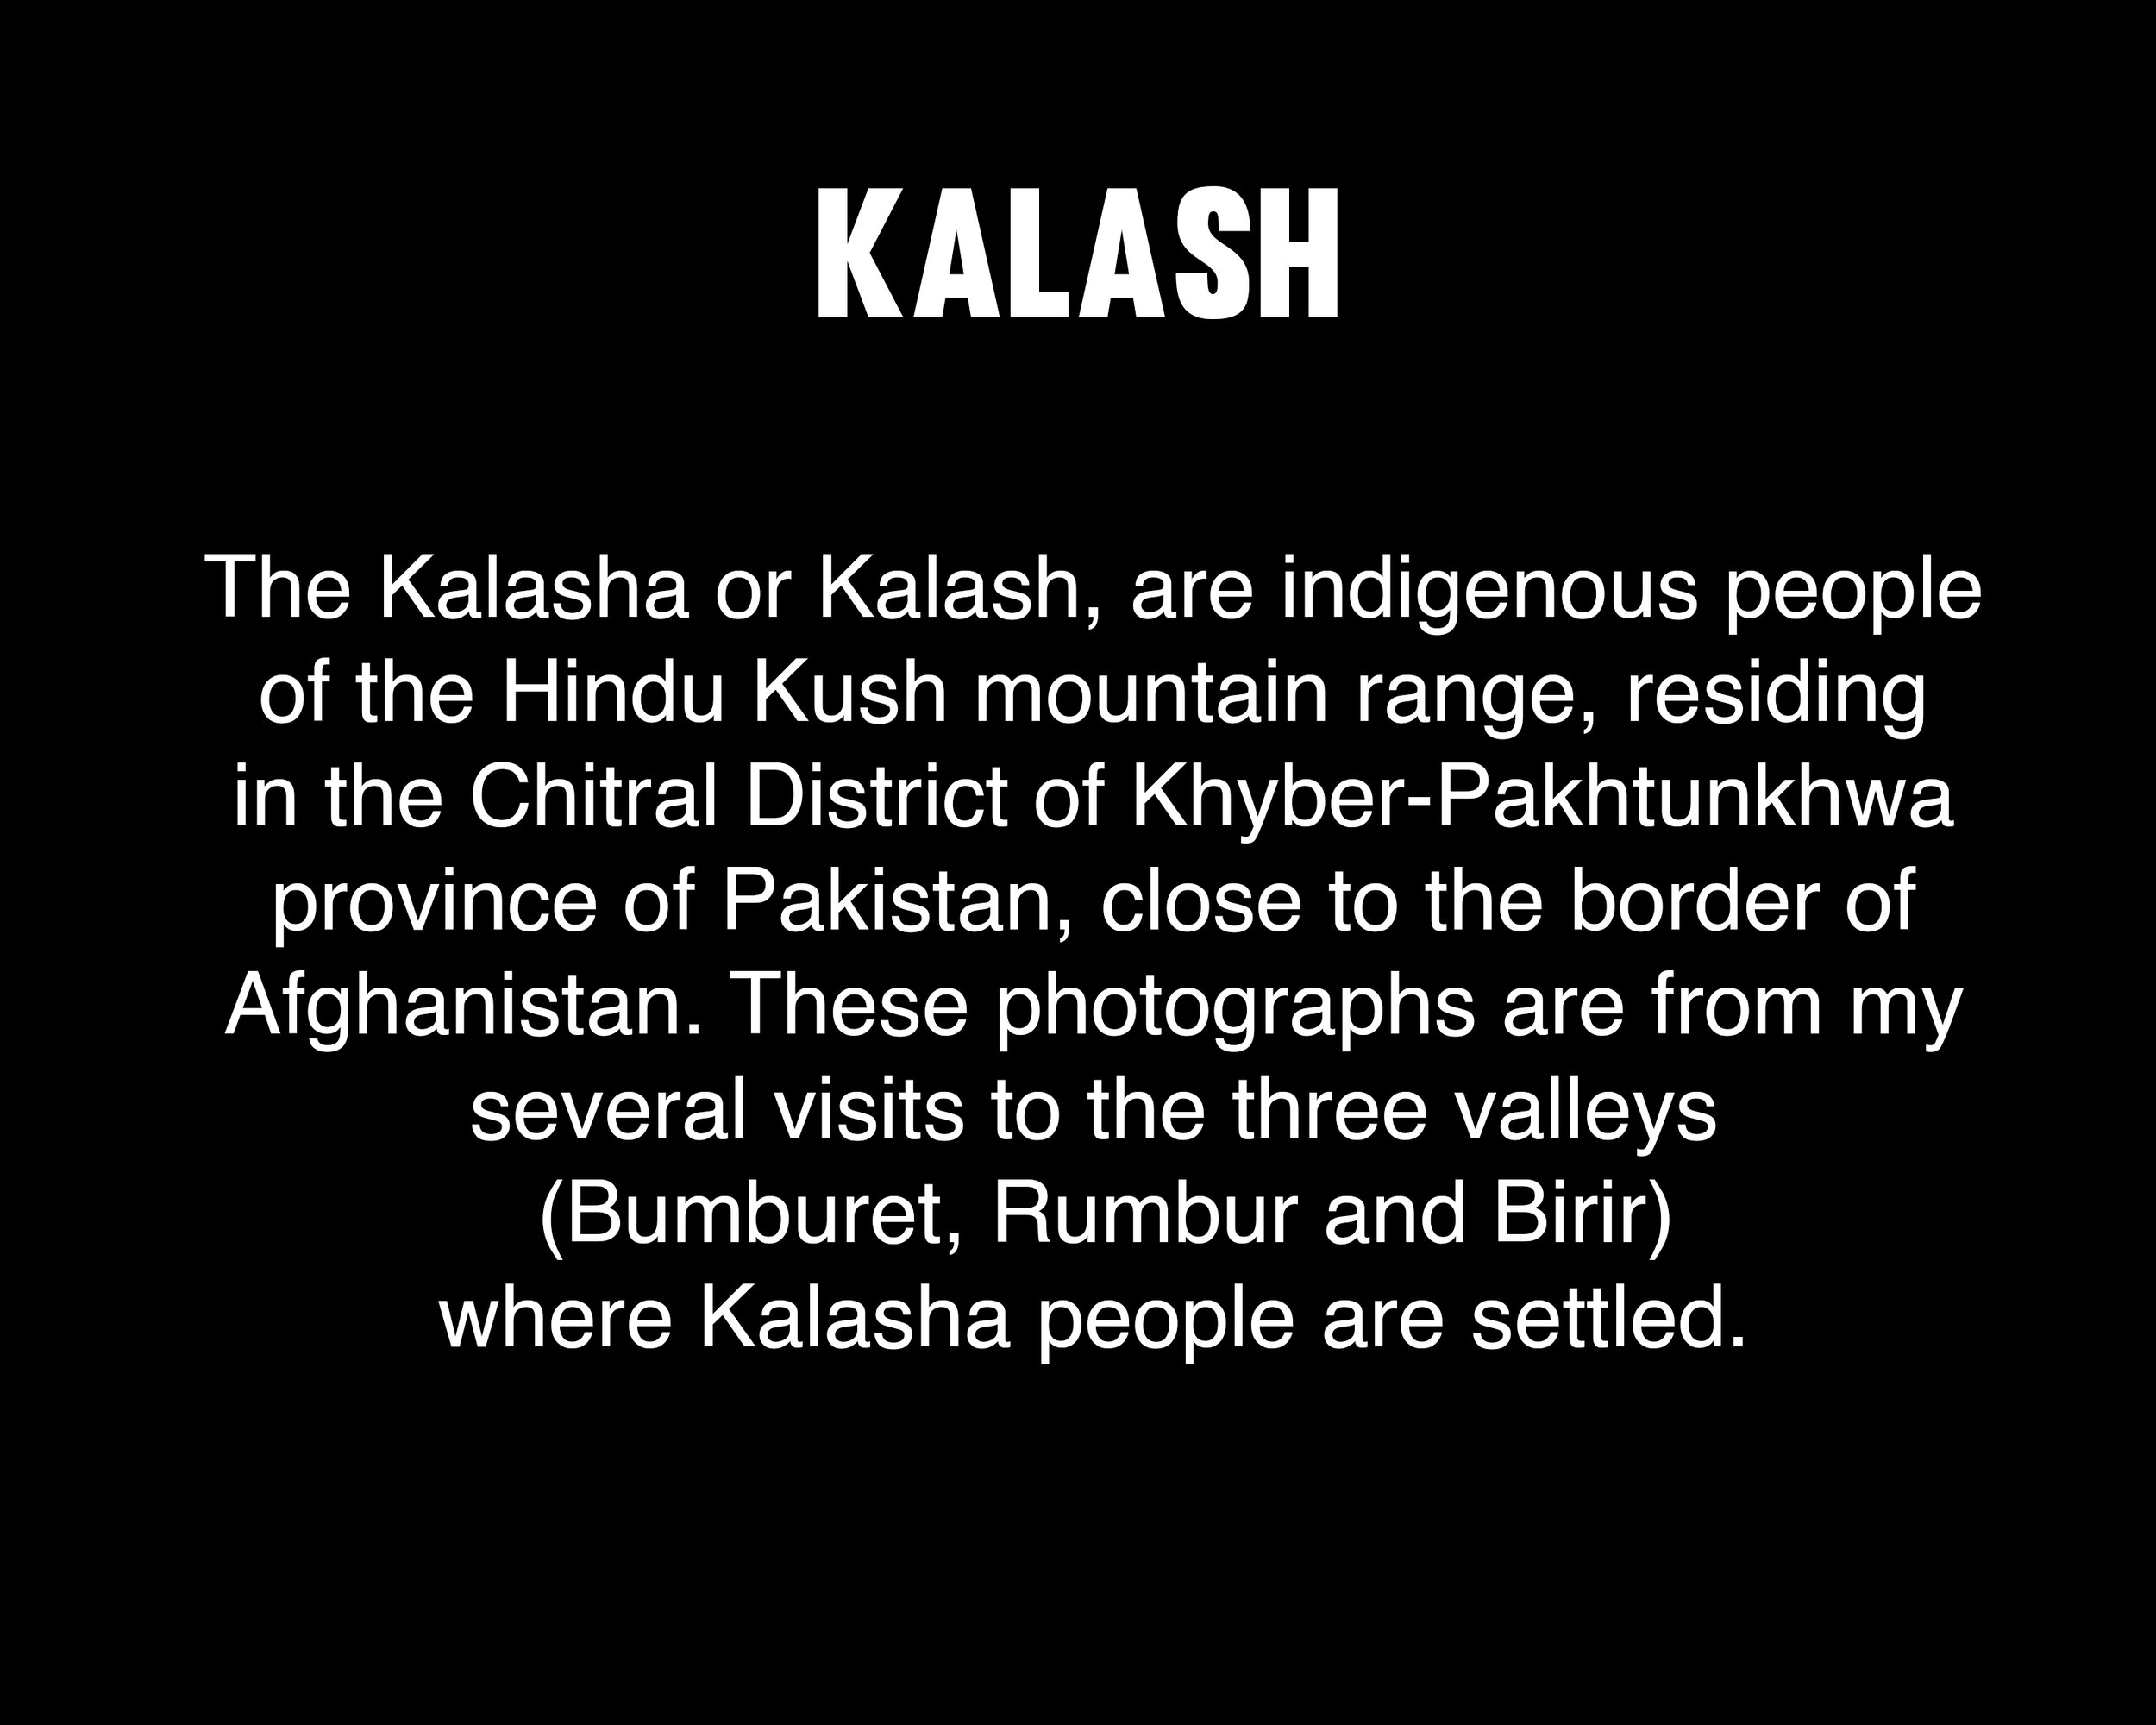  The Kalasha or Kalash, are indigenous people  of the Hindu Kush mountain range, residing  in the Chitral District of Khyber-Pakhtunkhwa  province of Pakistan, close to the border of  Afghanistan. These photographs are from my  several visits to the 